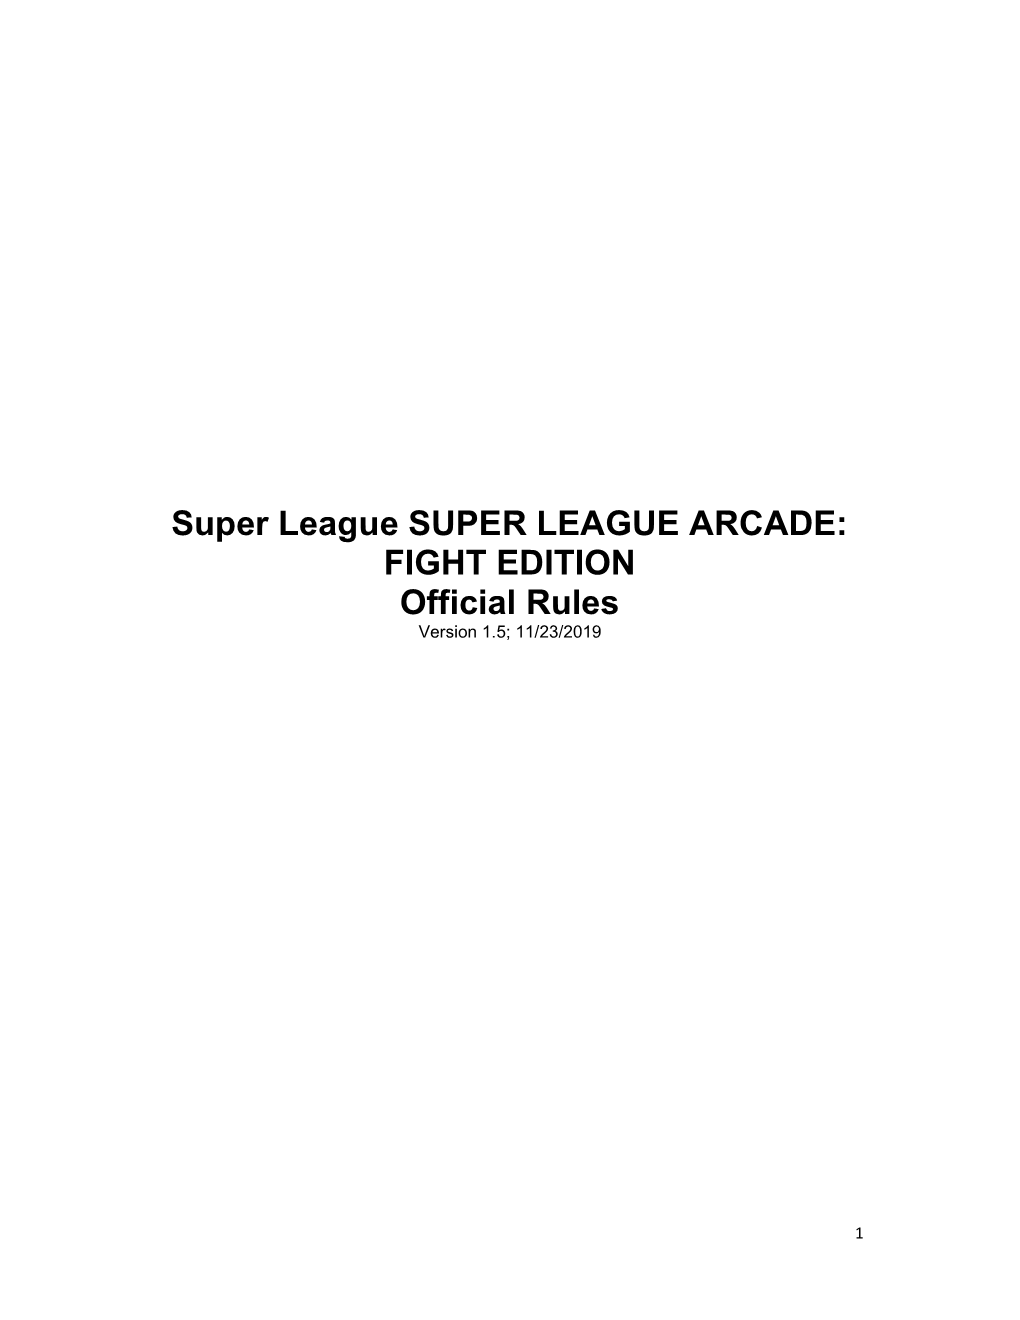 Super League Arcade – Fight Edition Official Rules